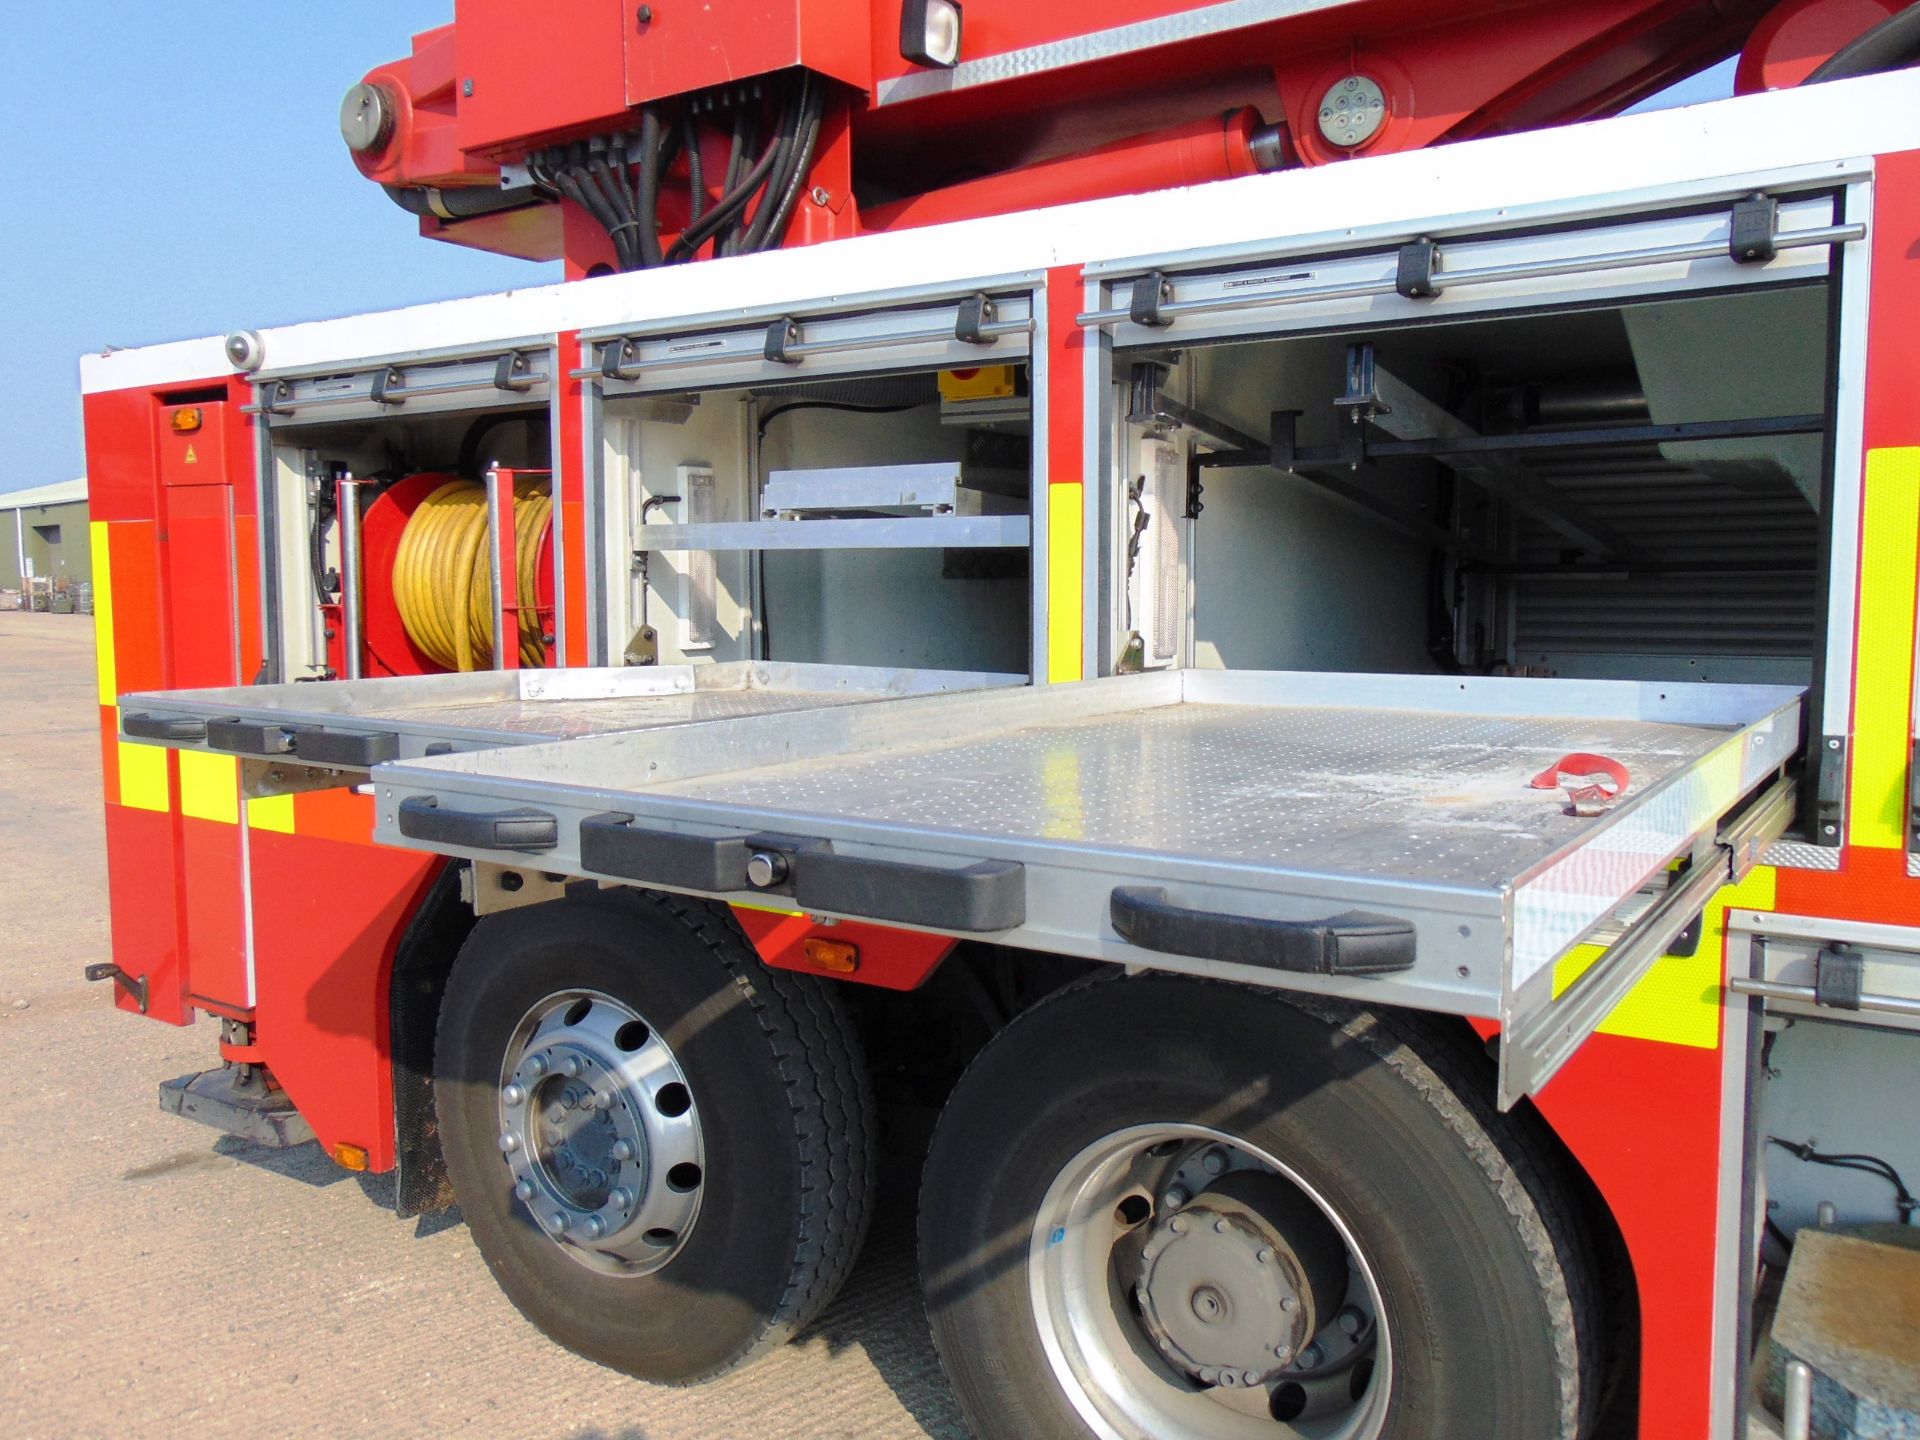 2008 Mercedes Econic CARP (Combined Aerial Rescue Pump) 6x2 Aerial Work Platform / Fire Appliance - Image 28 of 49